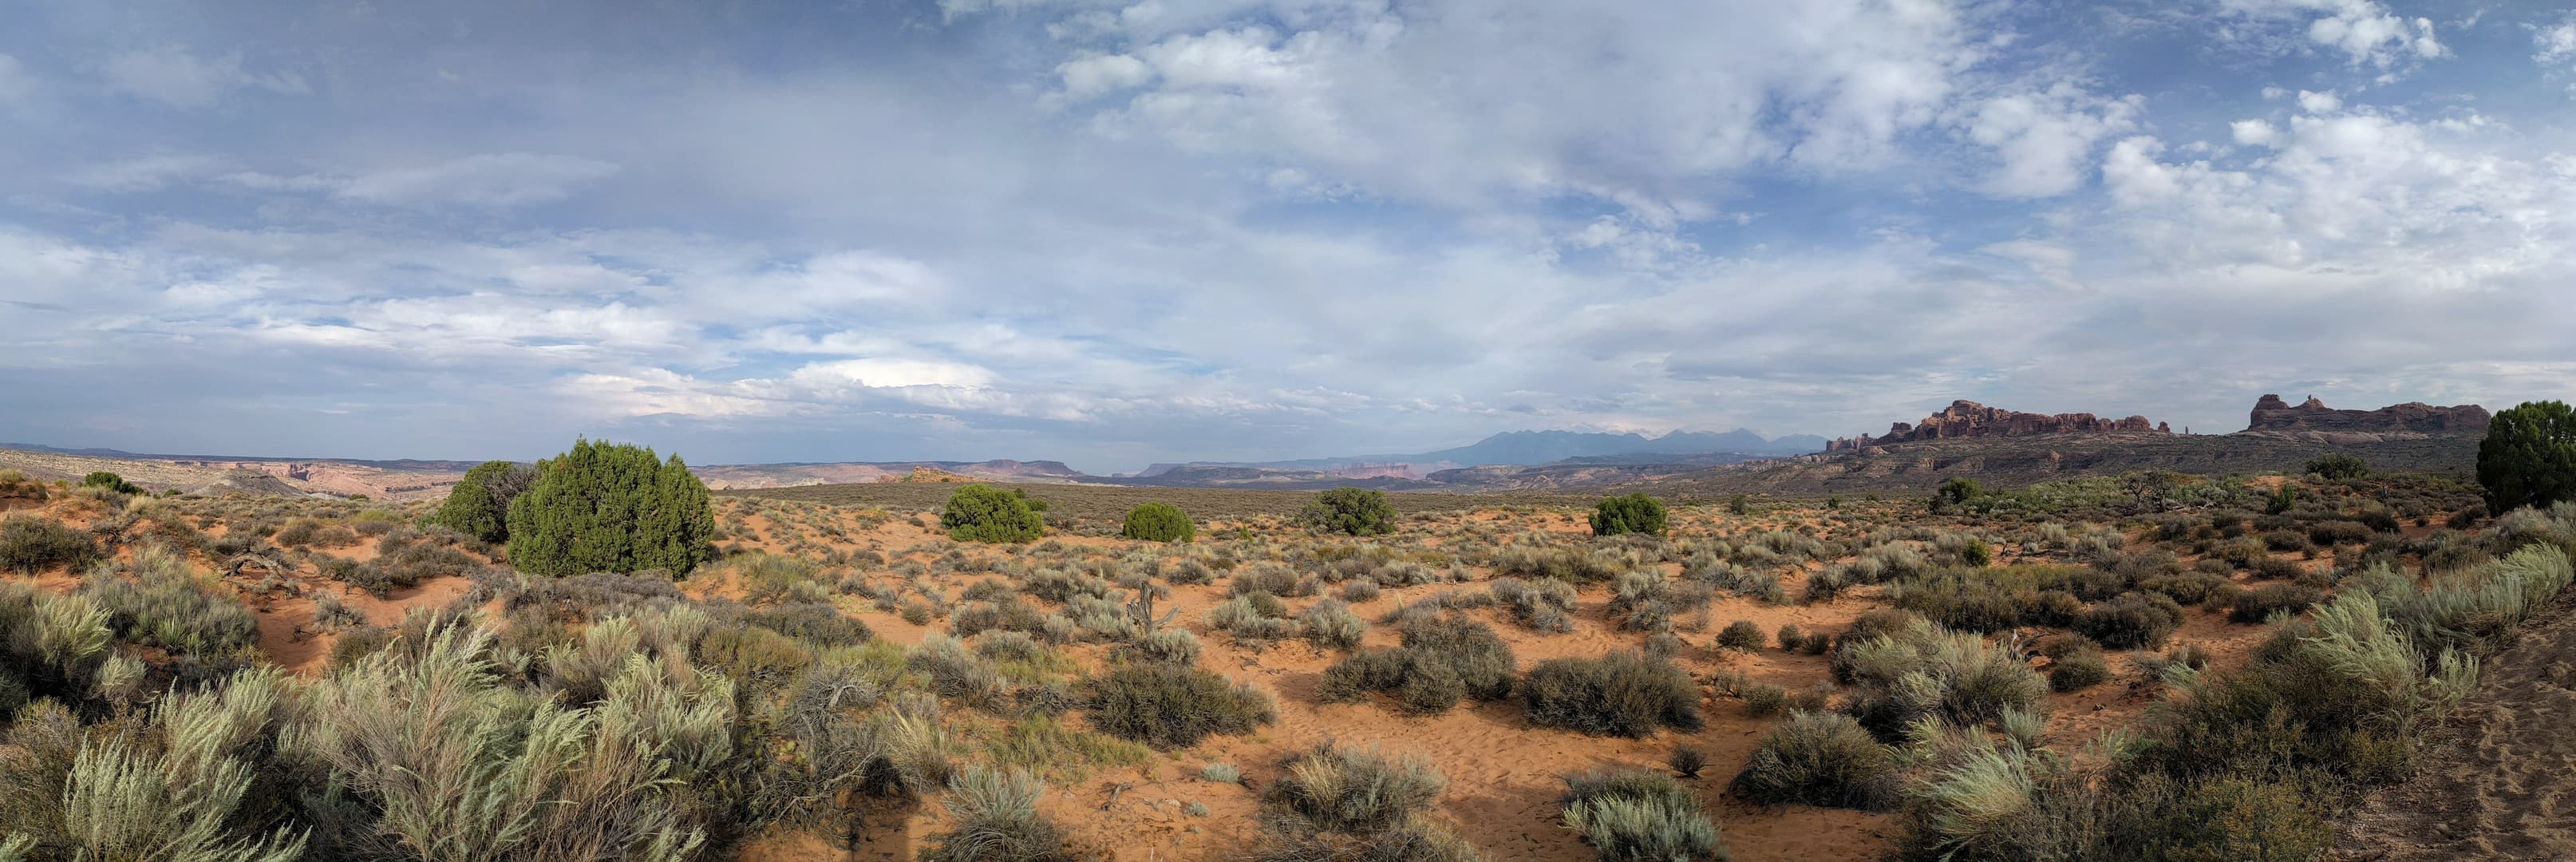 A desert panorama across Arches National Park.